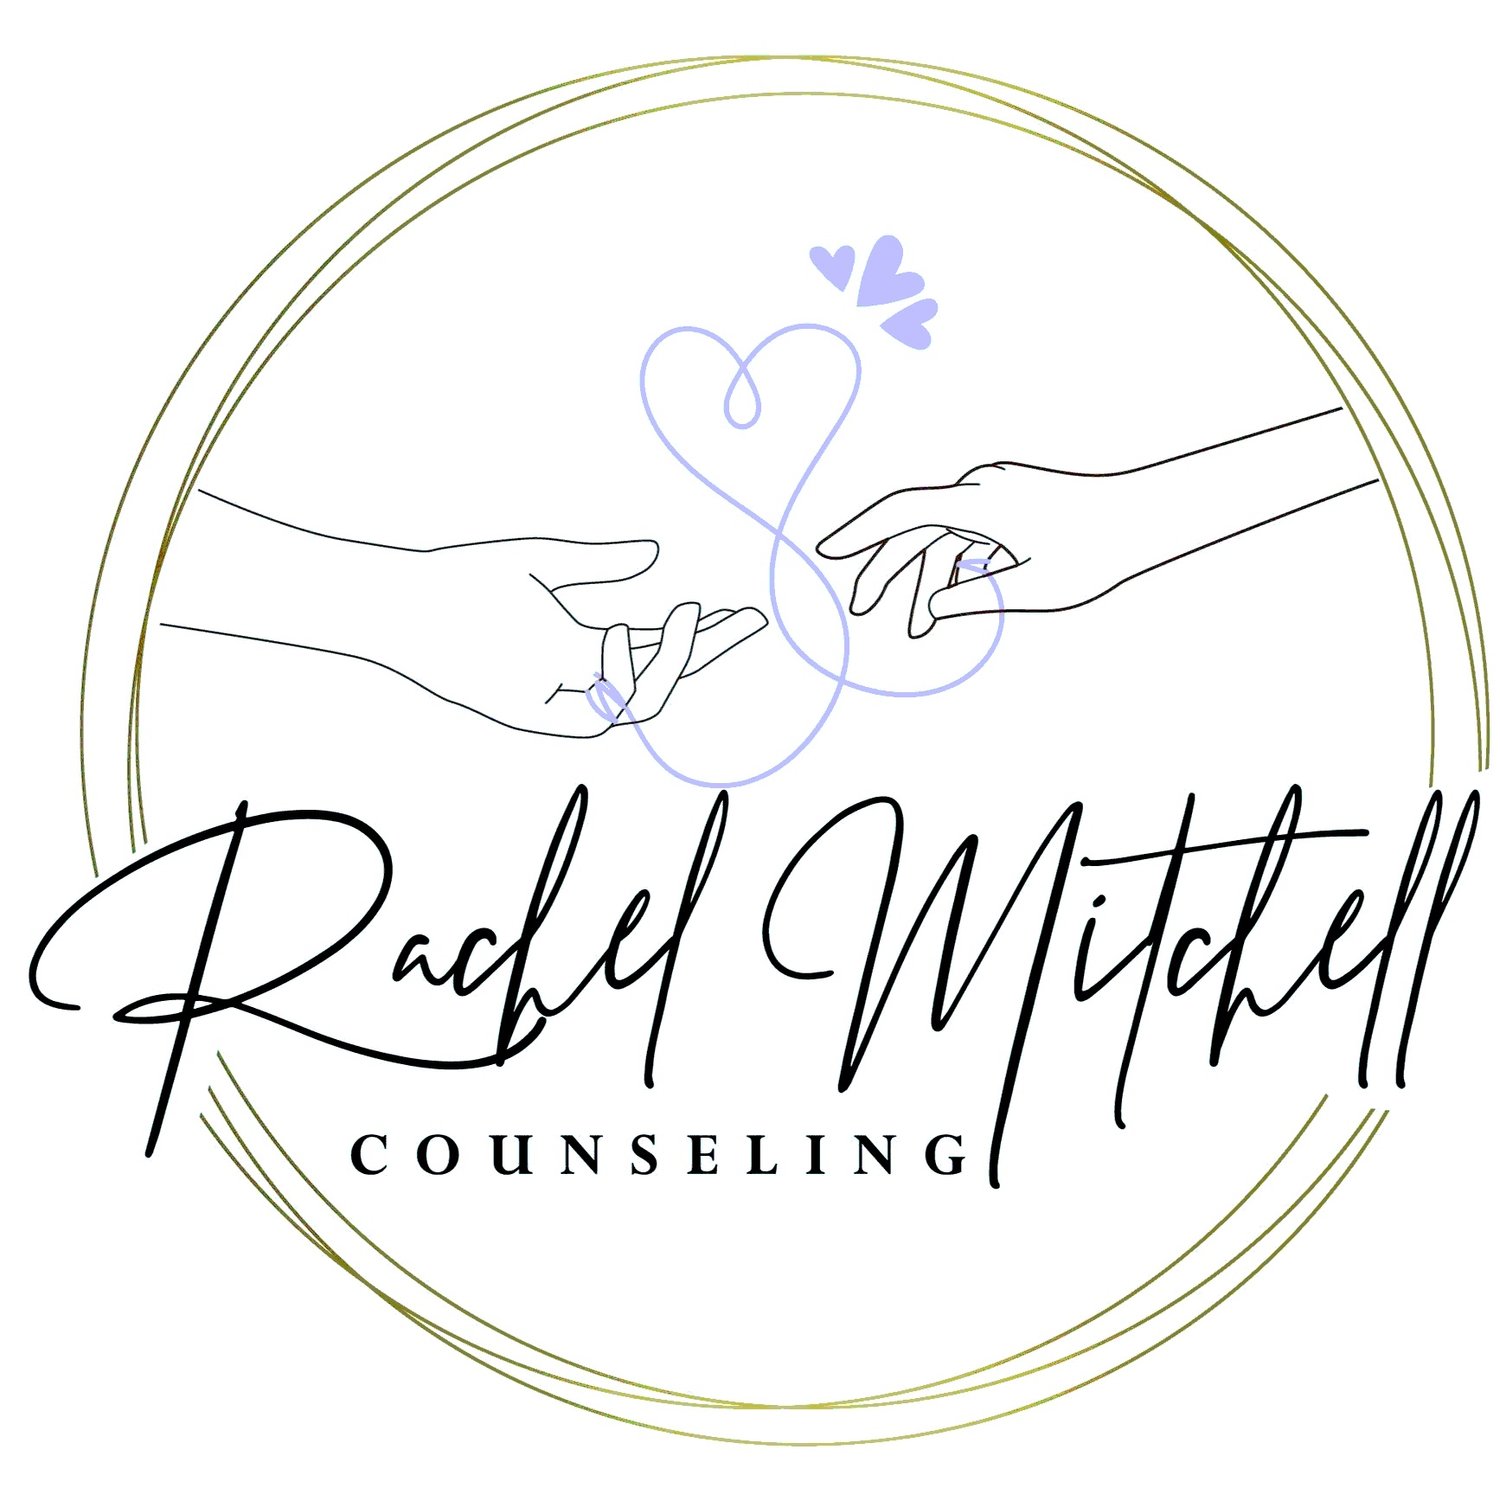 Rachel Mitchell Relationship Counseling